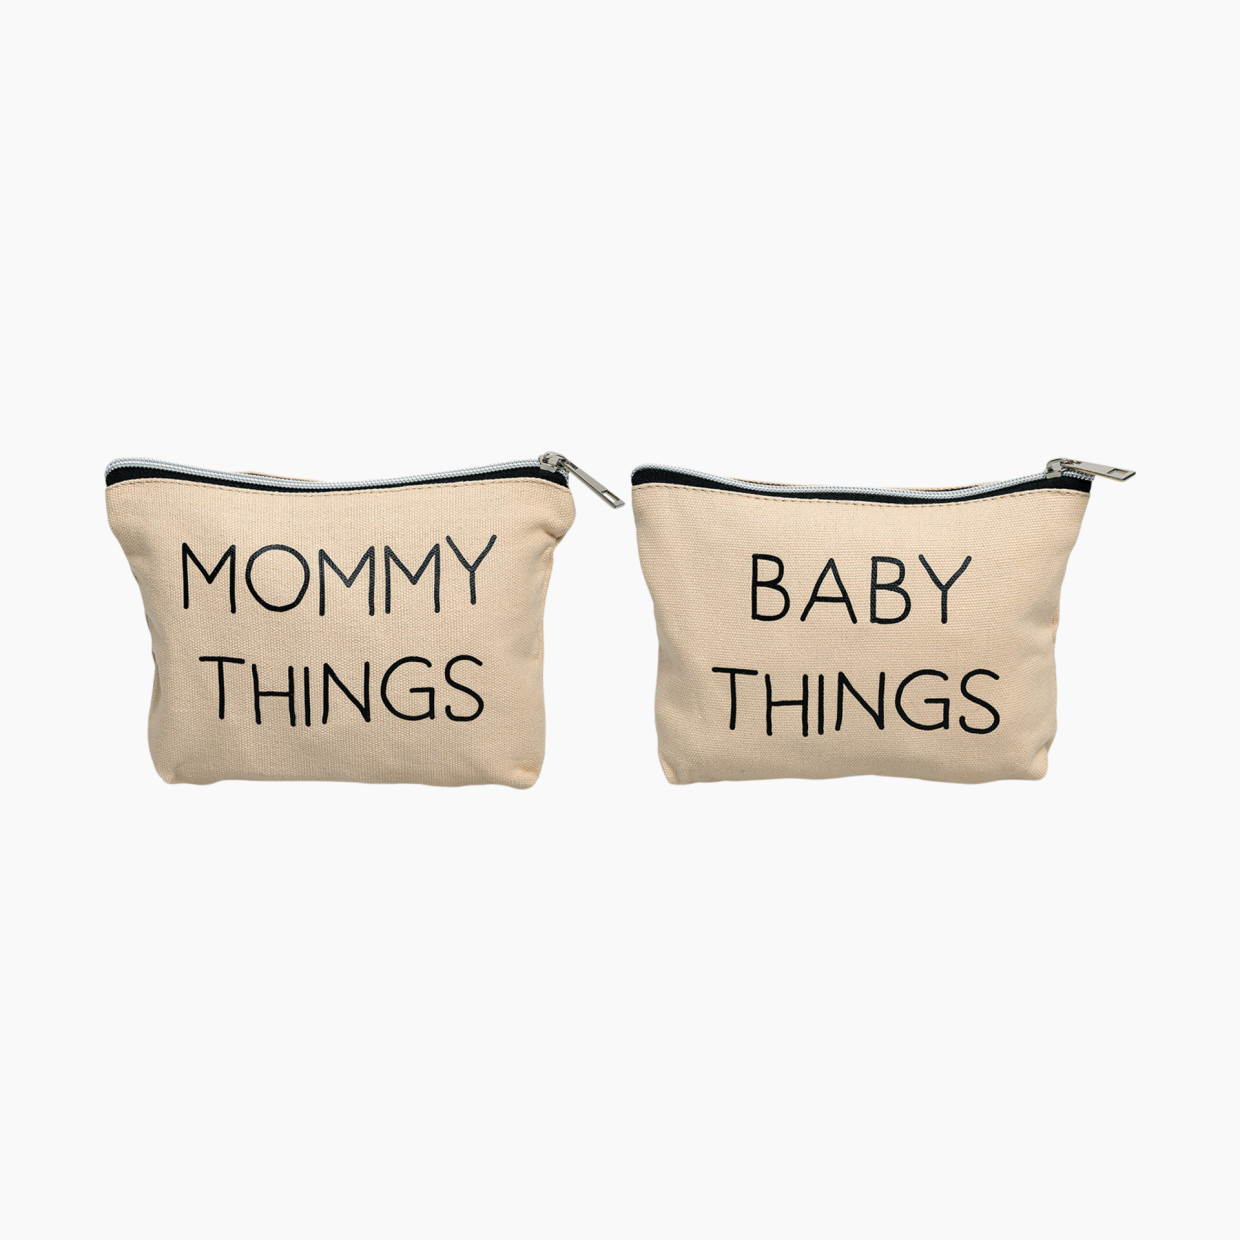 Pearhead Mommy & Me White Picture Frame